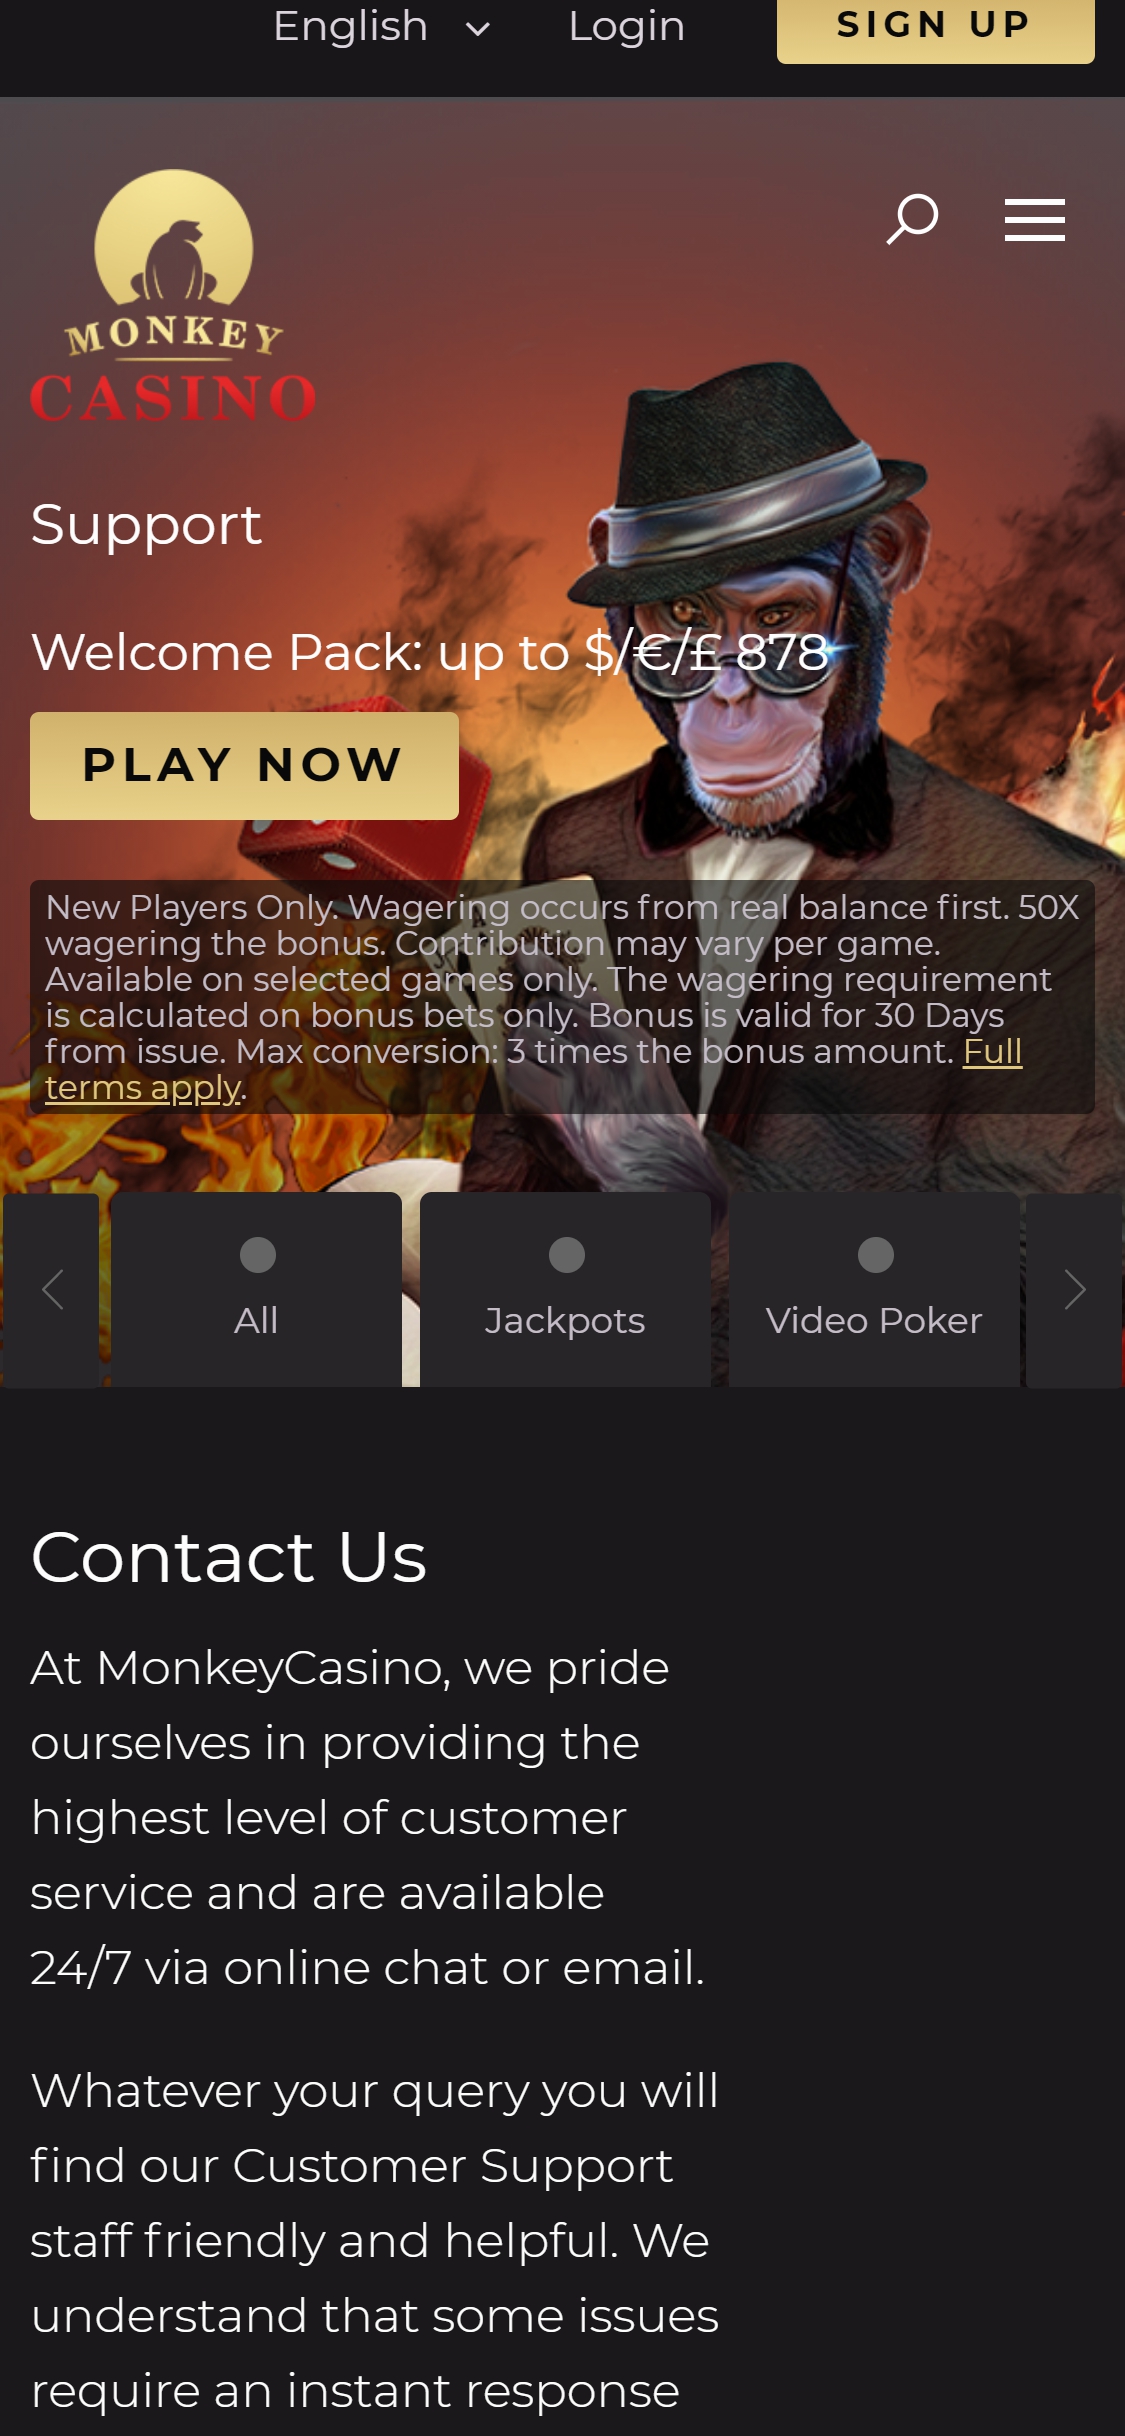 Monkey Casino Mobile Support Review